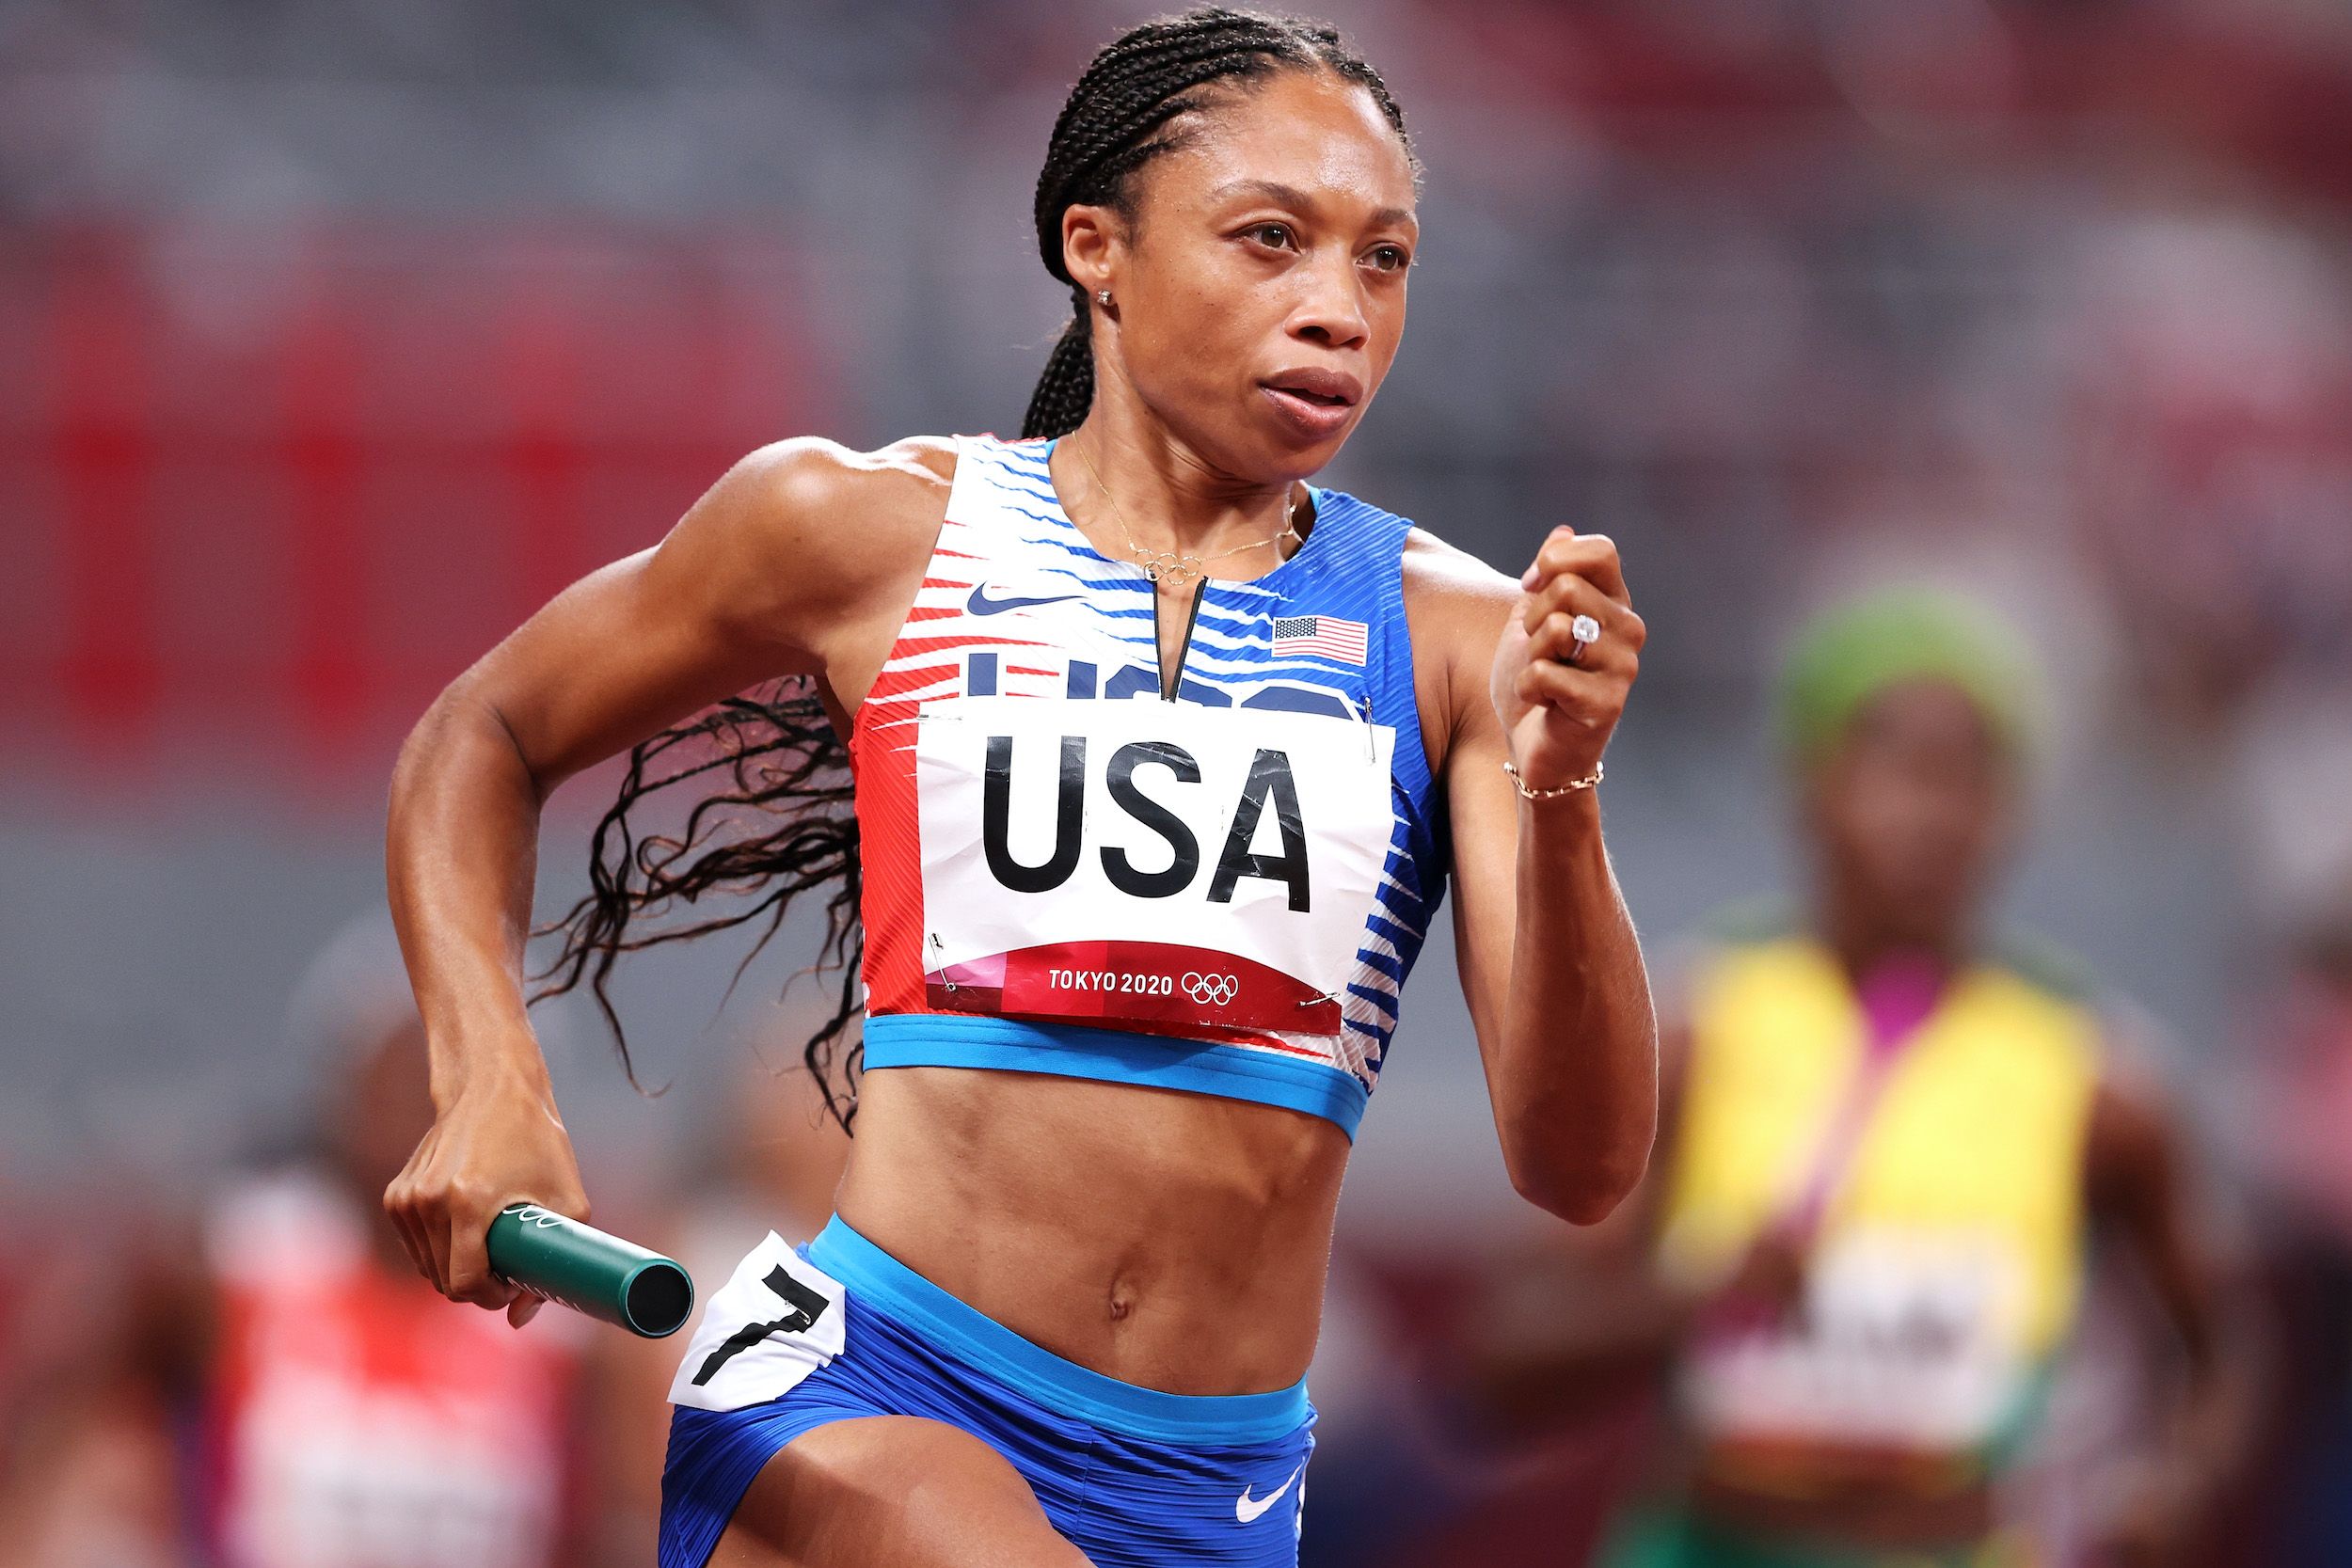 Allyson Felix becomes most decorated American track athlete in